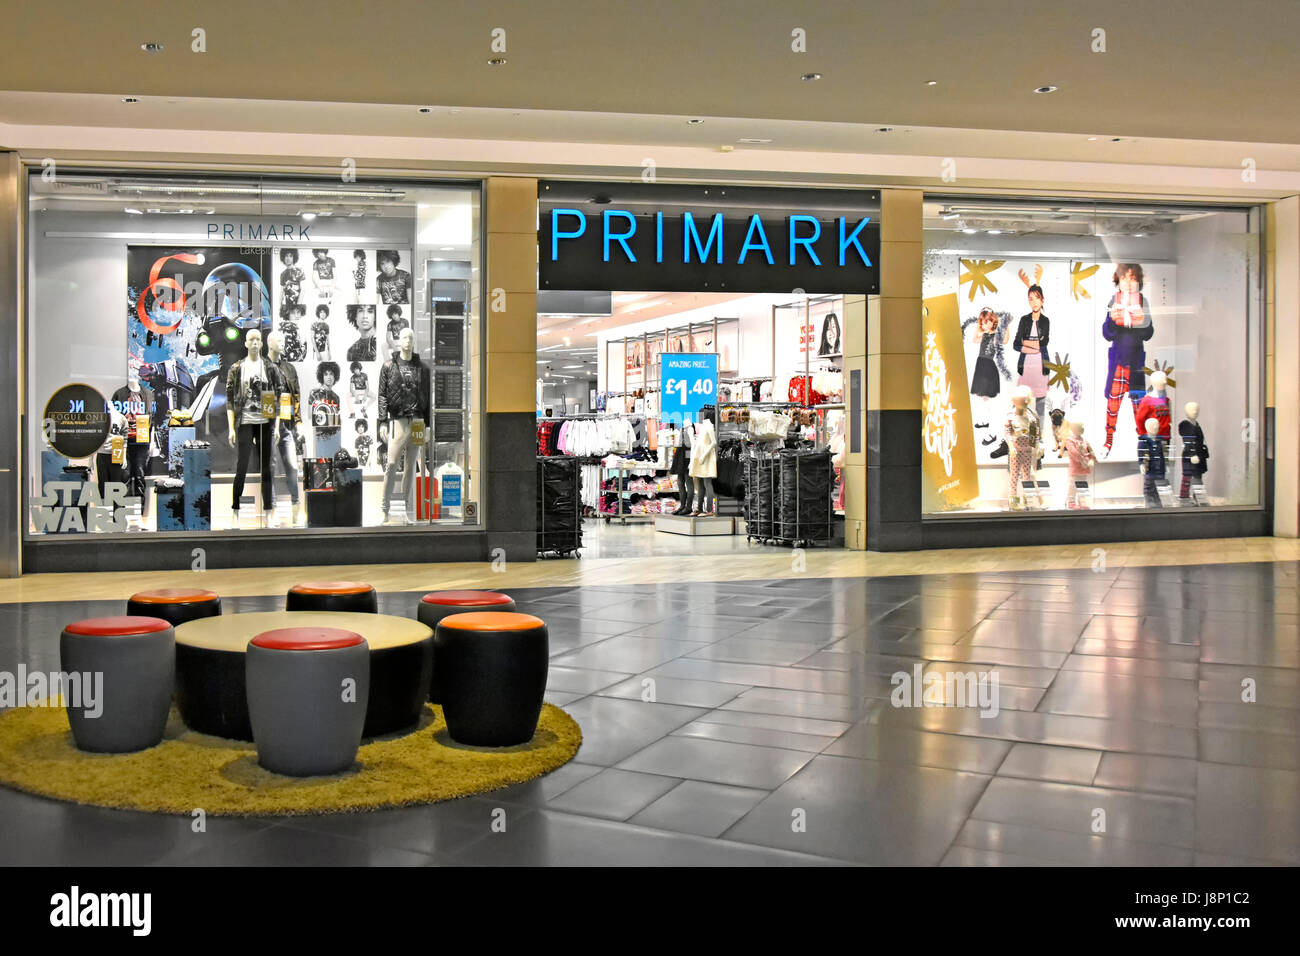 Early morning view of a quiet Primark store entrance in Intu indoor shopping mall Lakeside shopping centre Thurrock Essex England with window displays Stock Photo